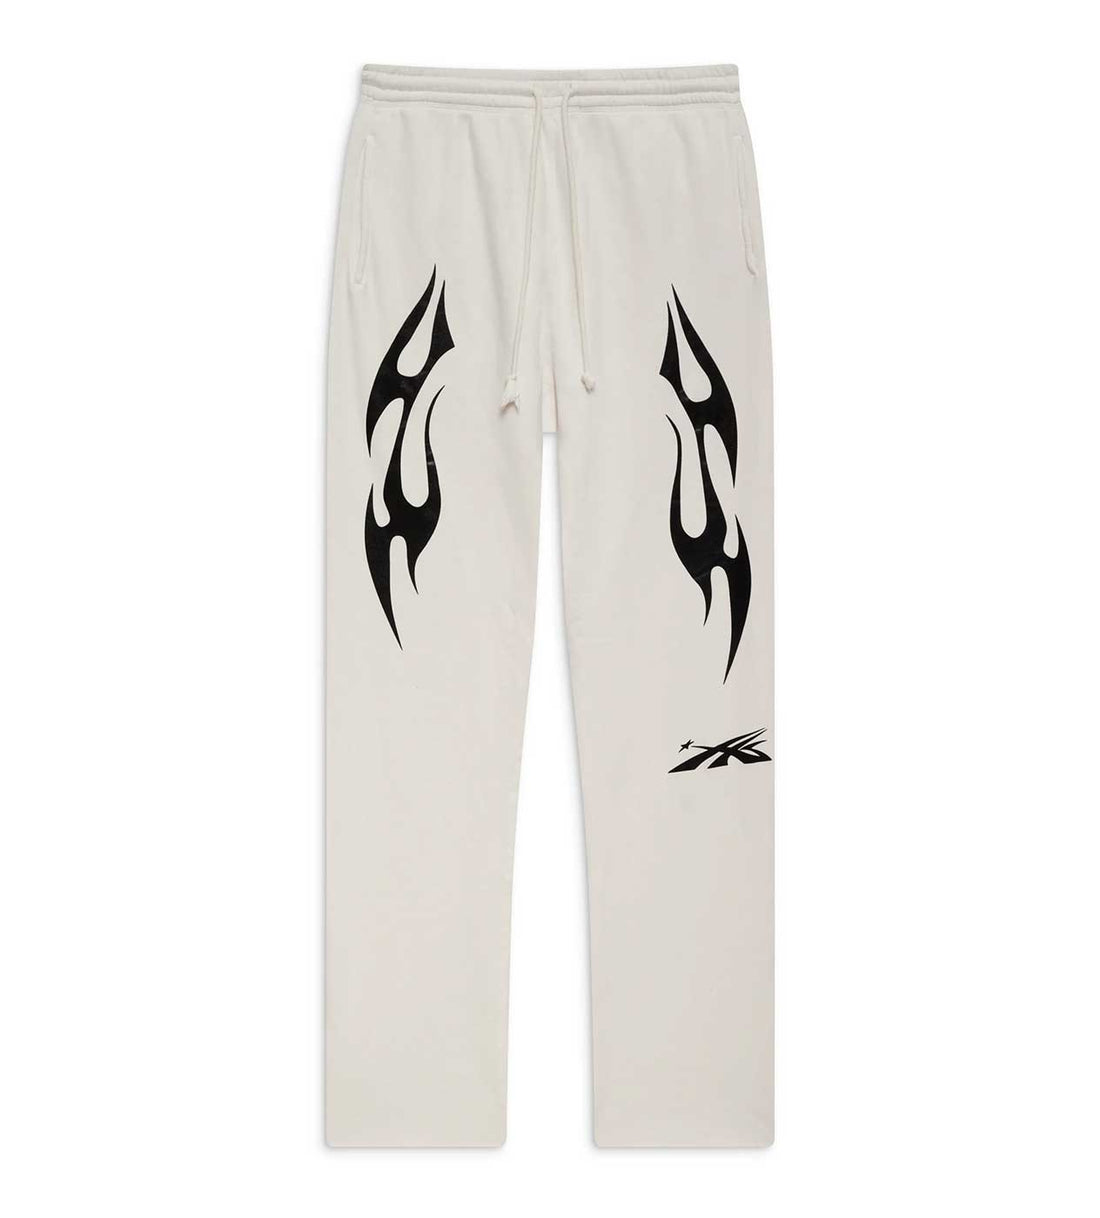 Hellstar Sports Sweatpants White Front View